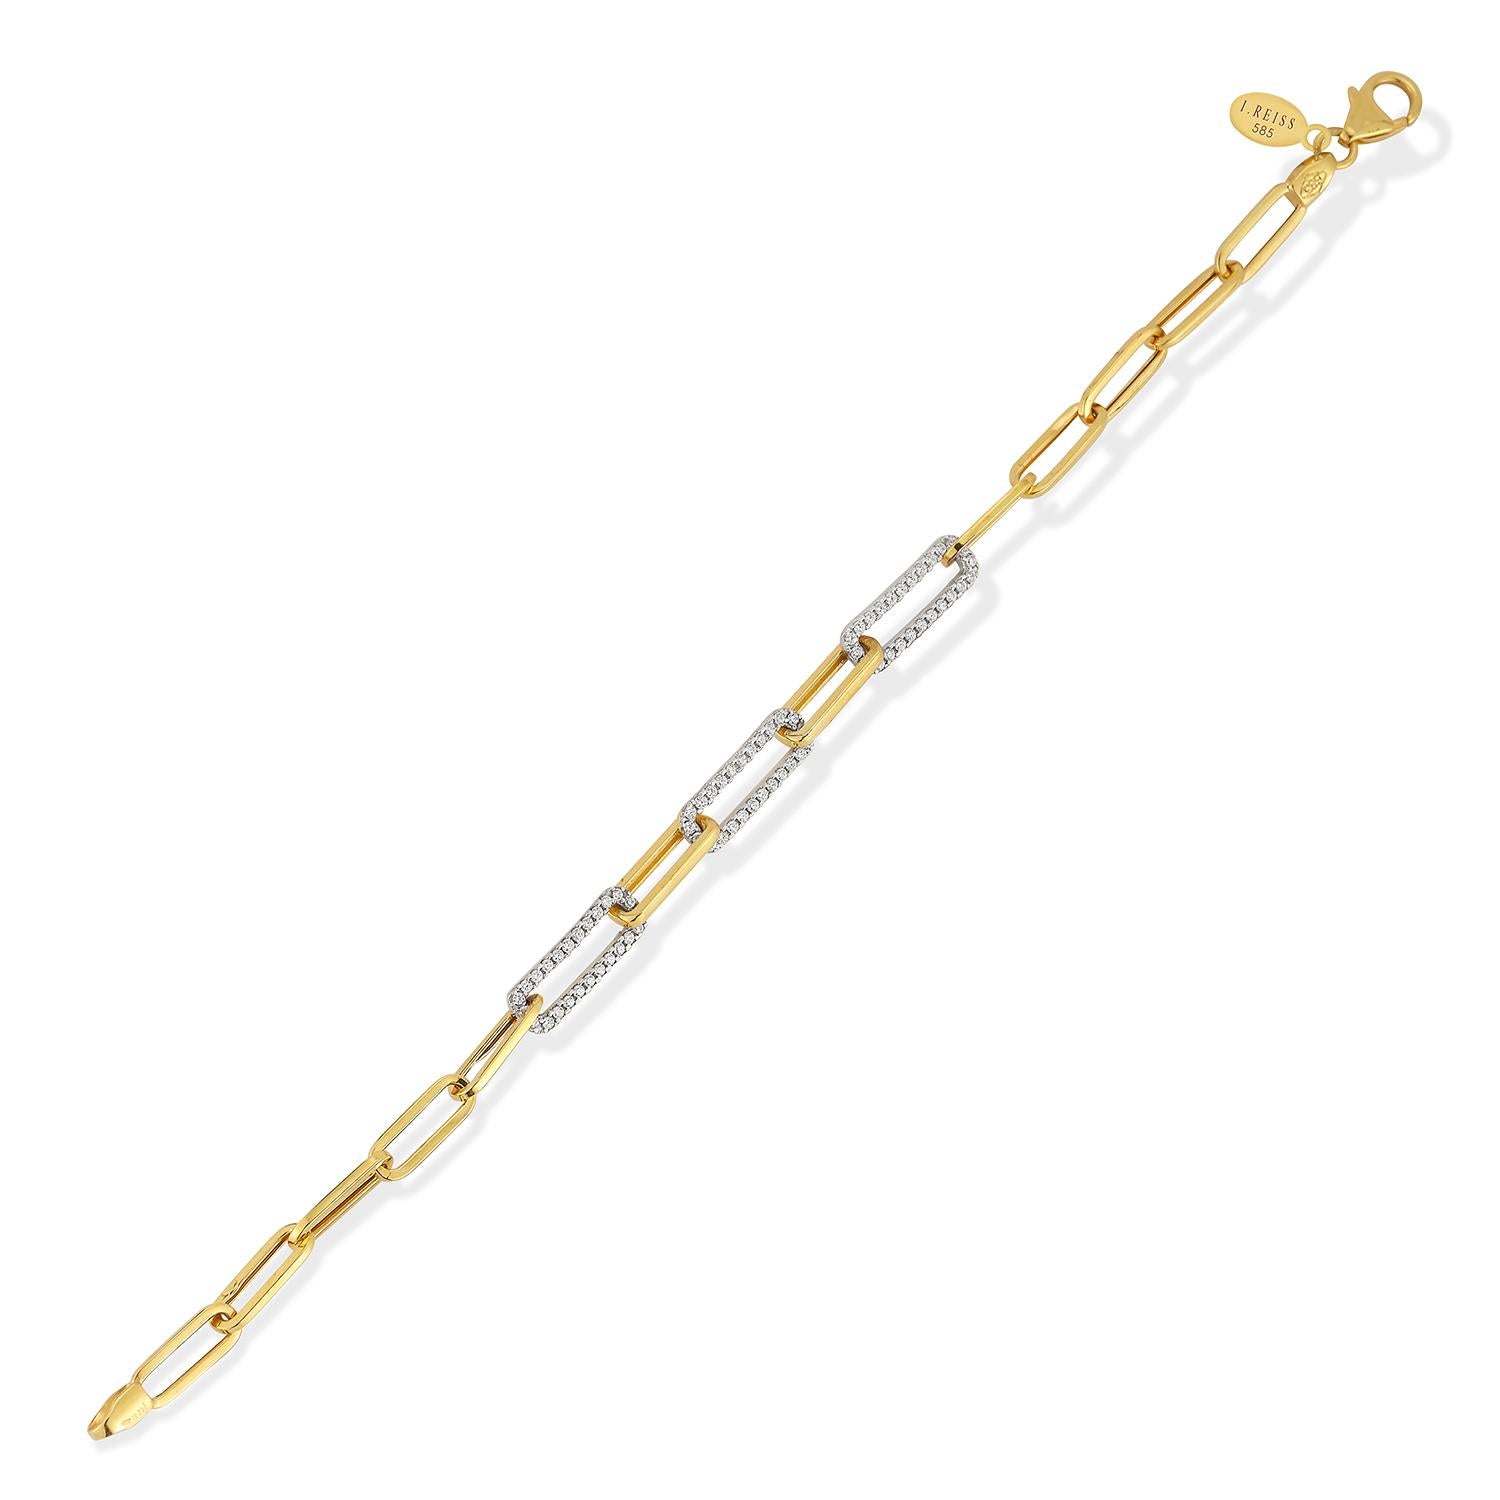 14 Karat Yellow Gold Hand-Crafted Polish-Finished Open Link Bracelet, Accented with0.43 Carats of 3 Open Link Diamond Rectangles Set with a Lobster Claw Clasp.
